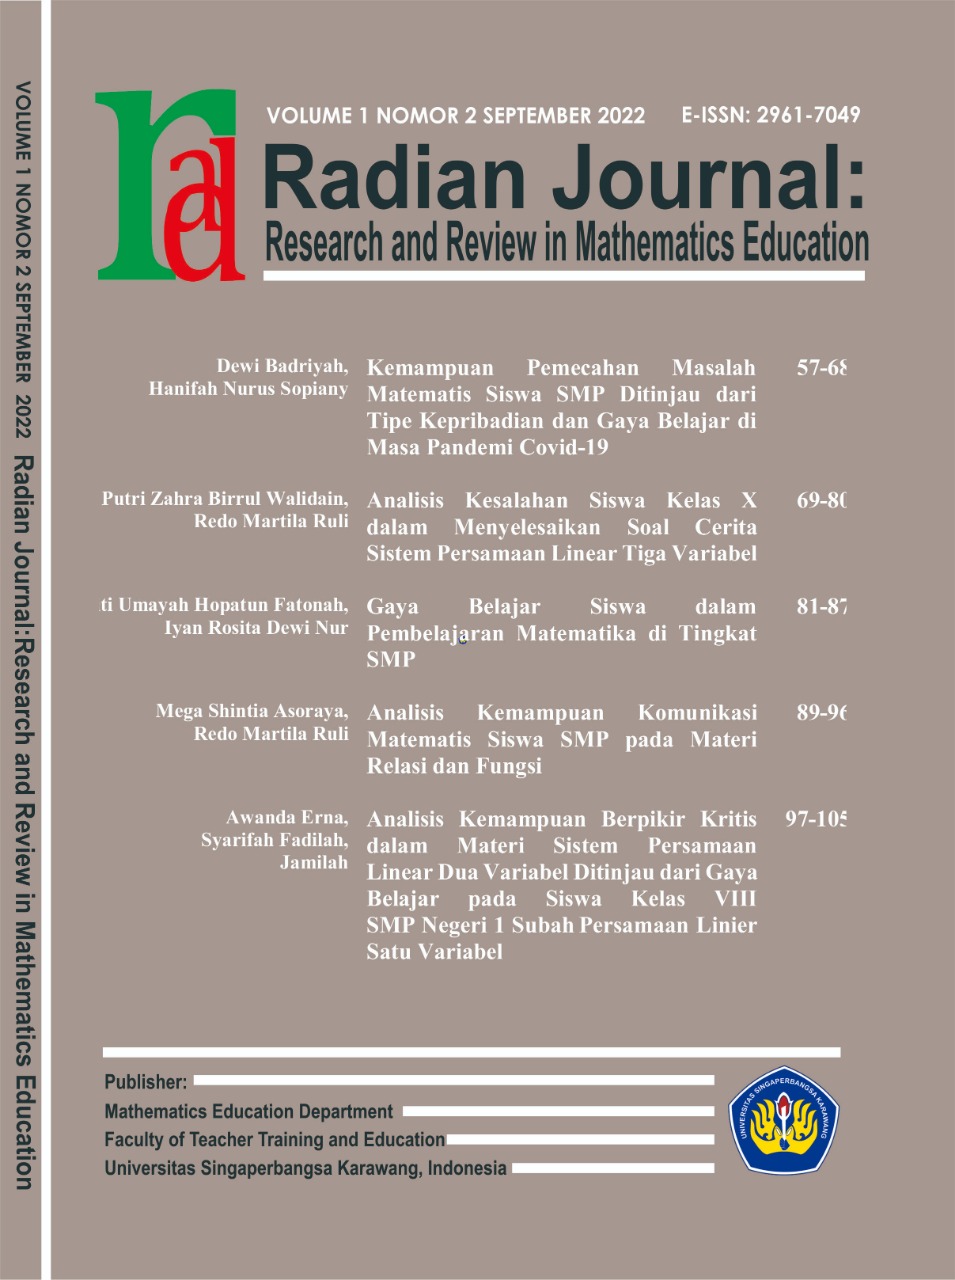 					Lihat Vol 1 No 2 (2022): Radian Journal: Research and Review in Mathematics Education 
				